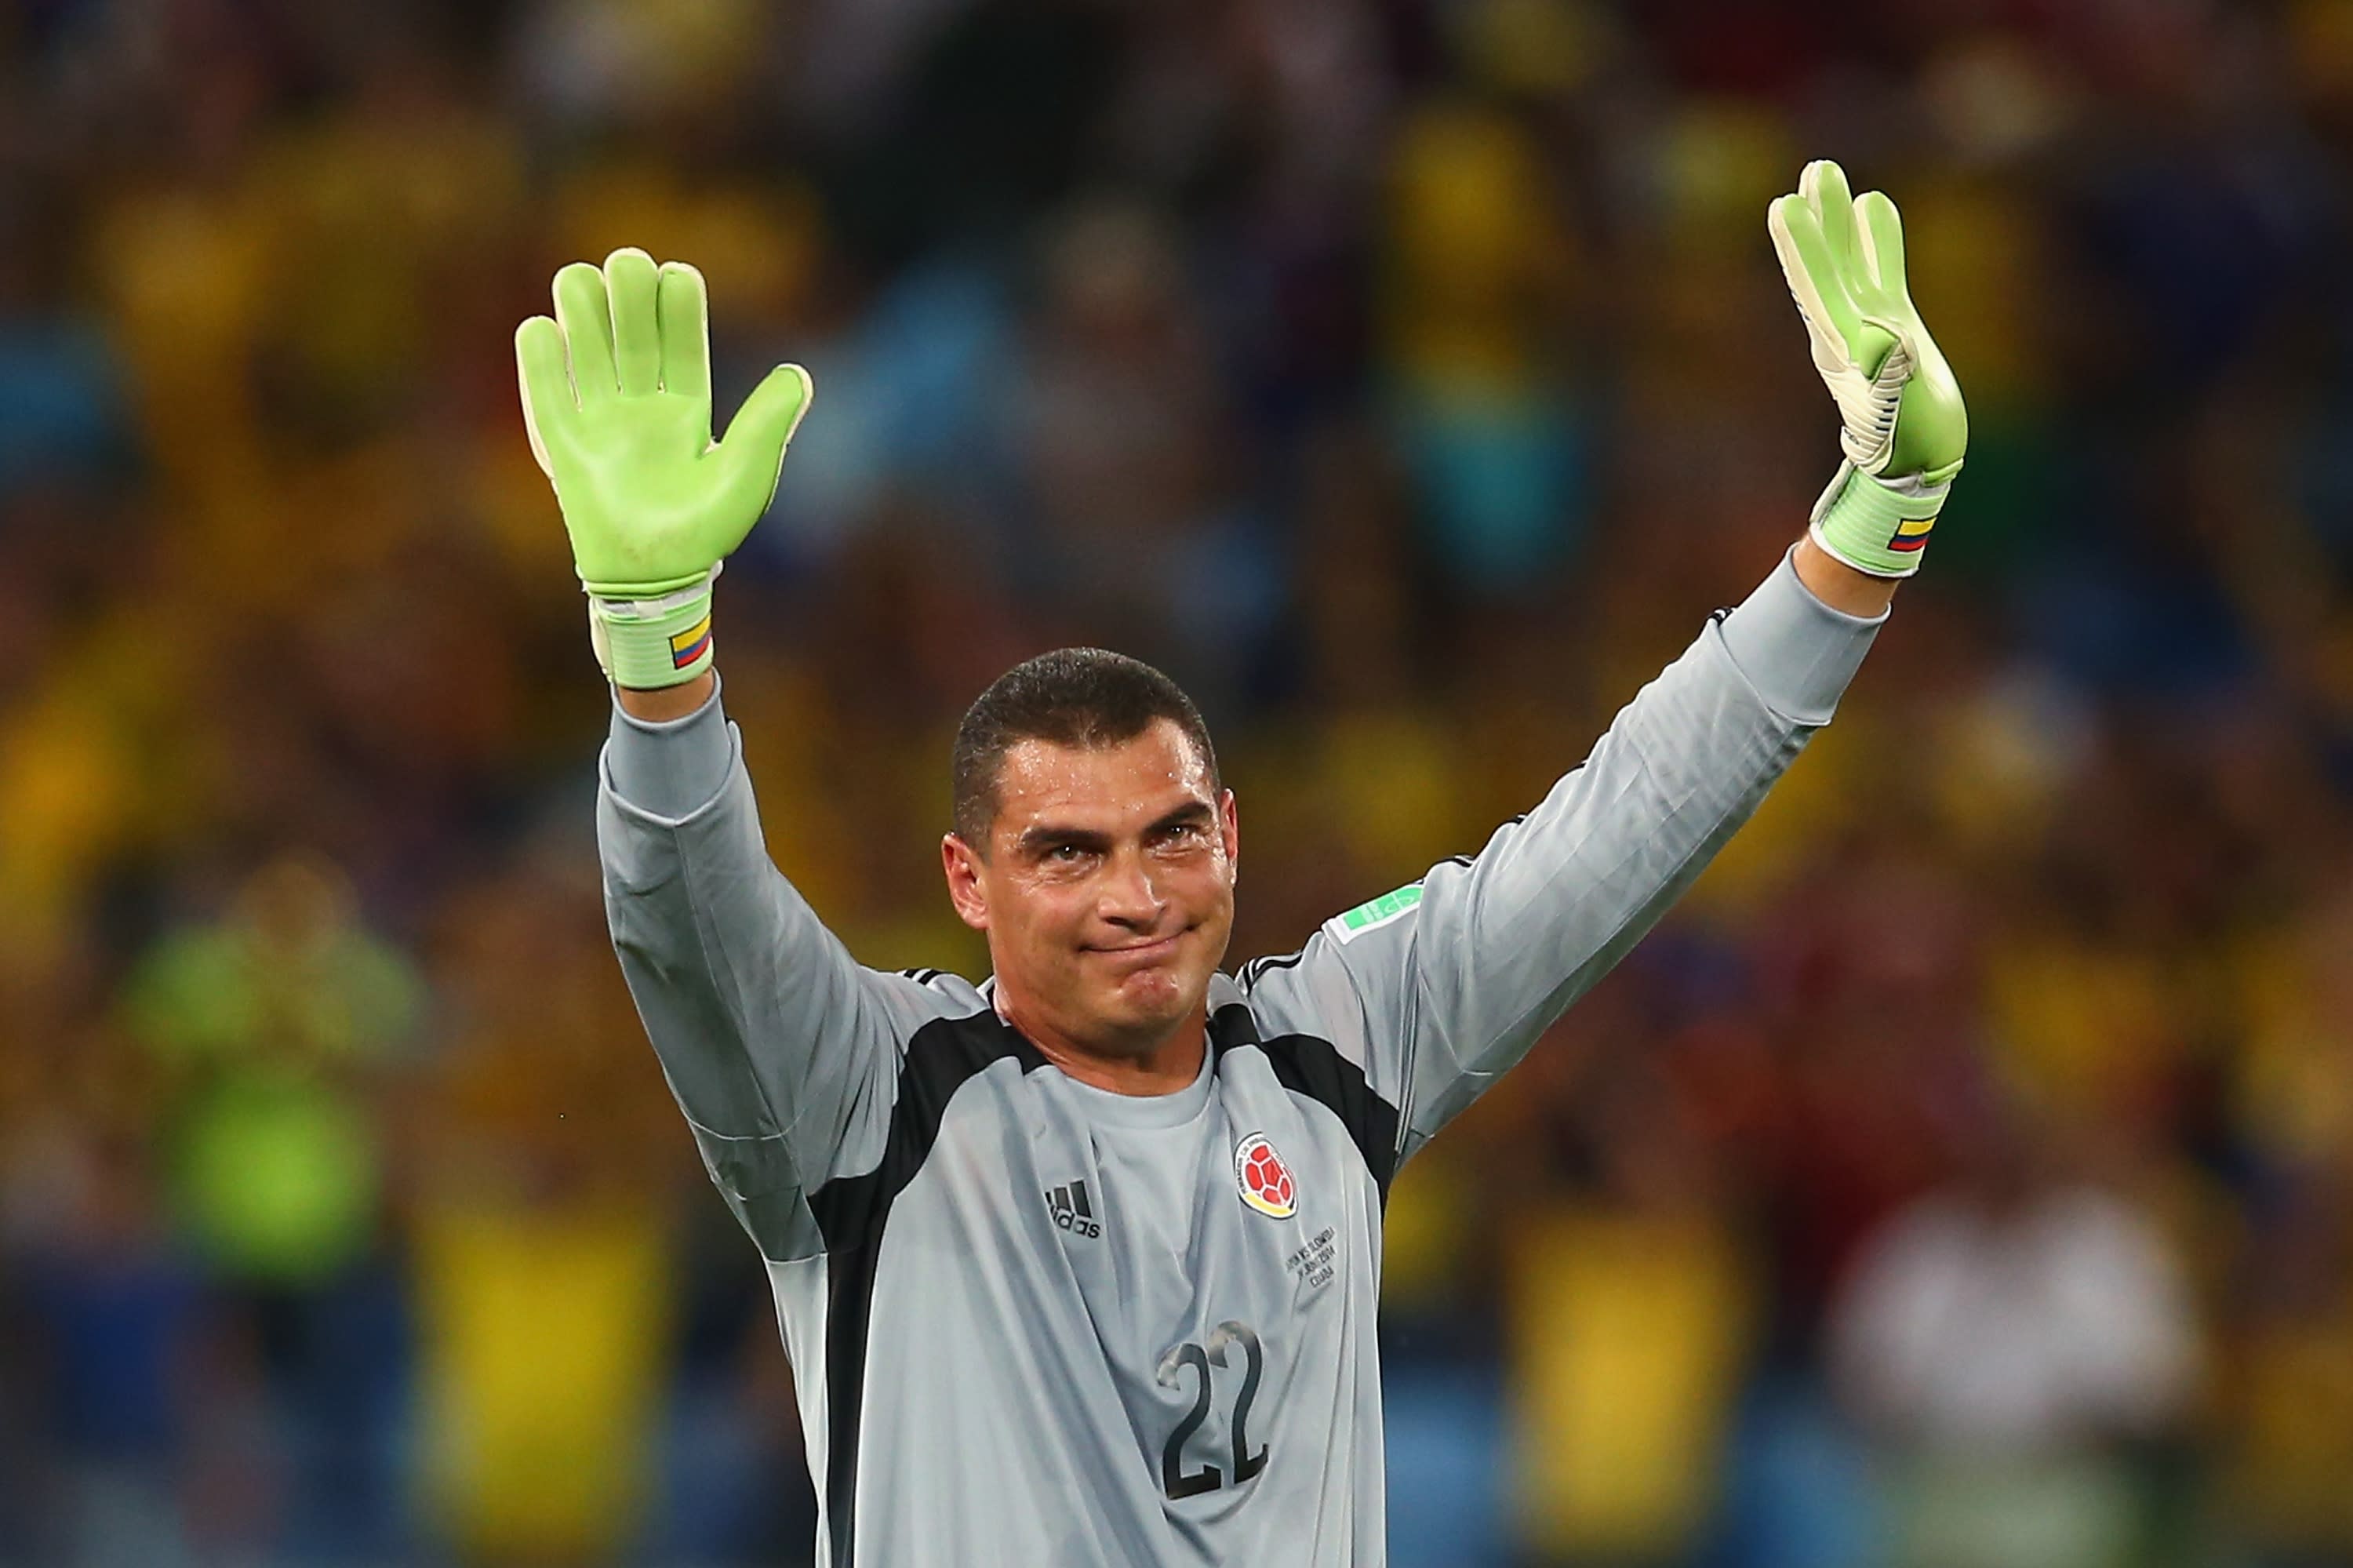 Colombia goalkeeper Faryd Mondragon becomes oldest player in World Cup history at 43